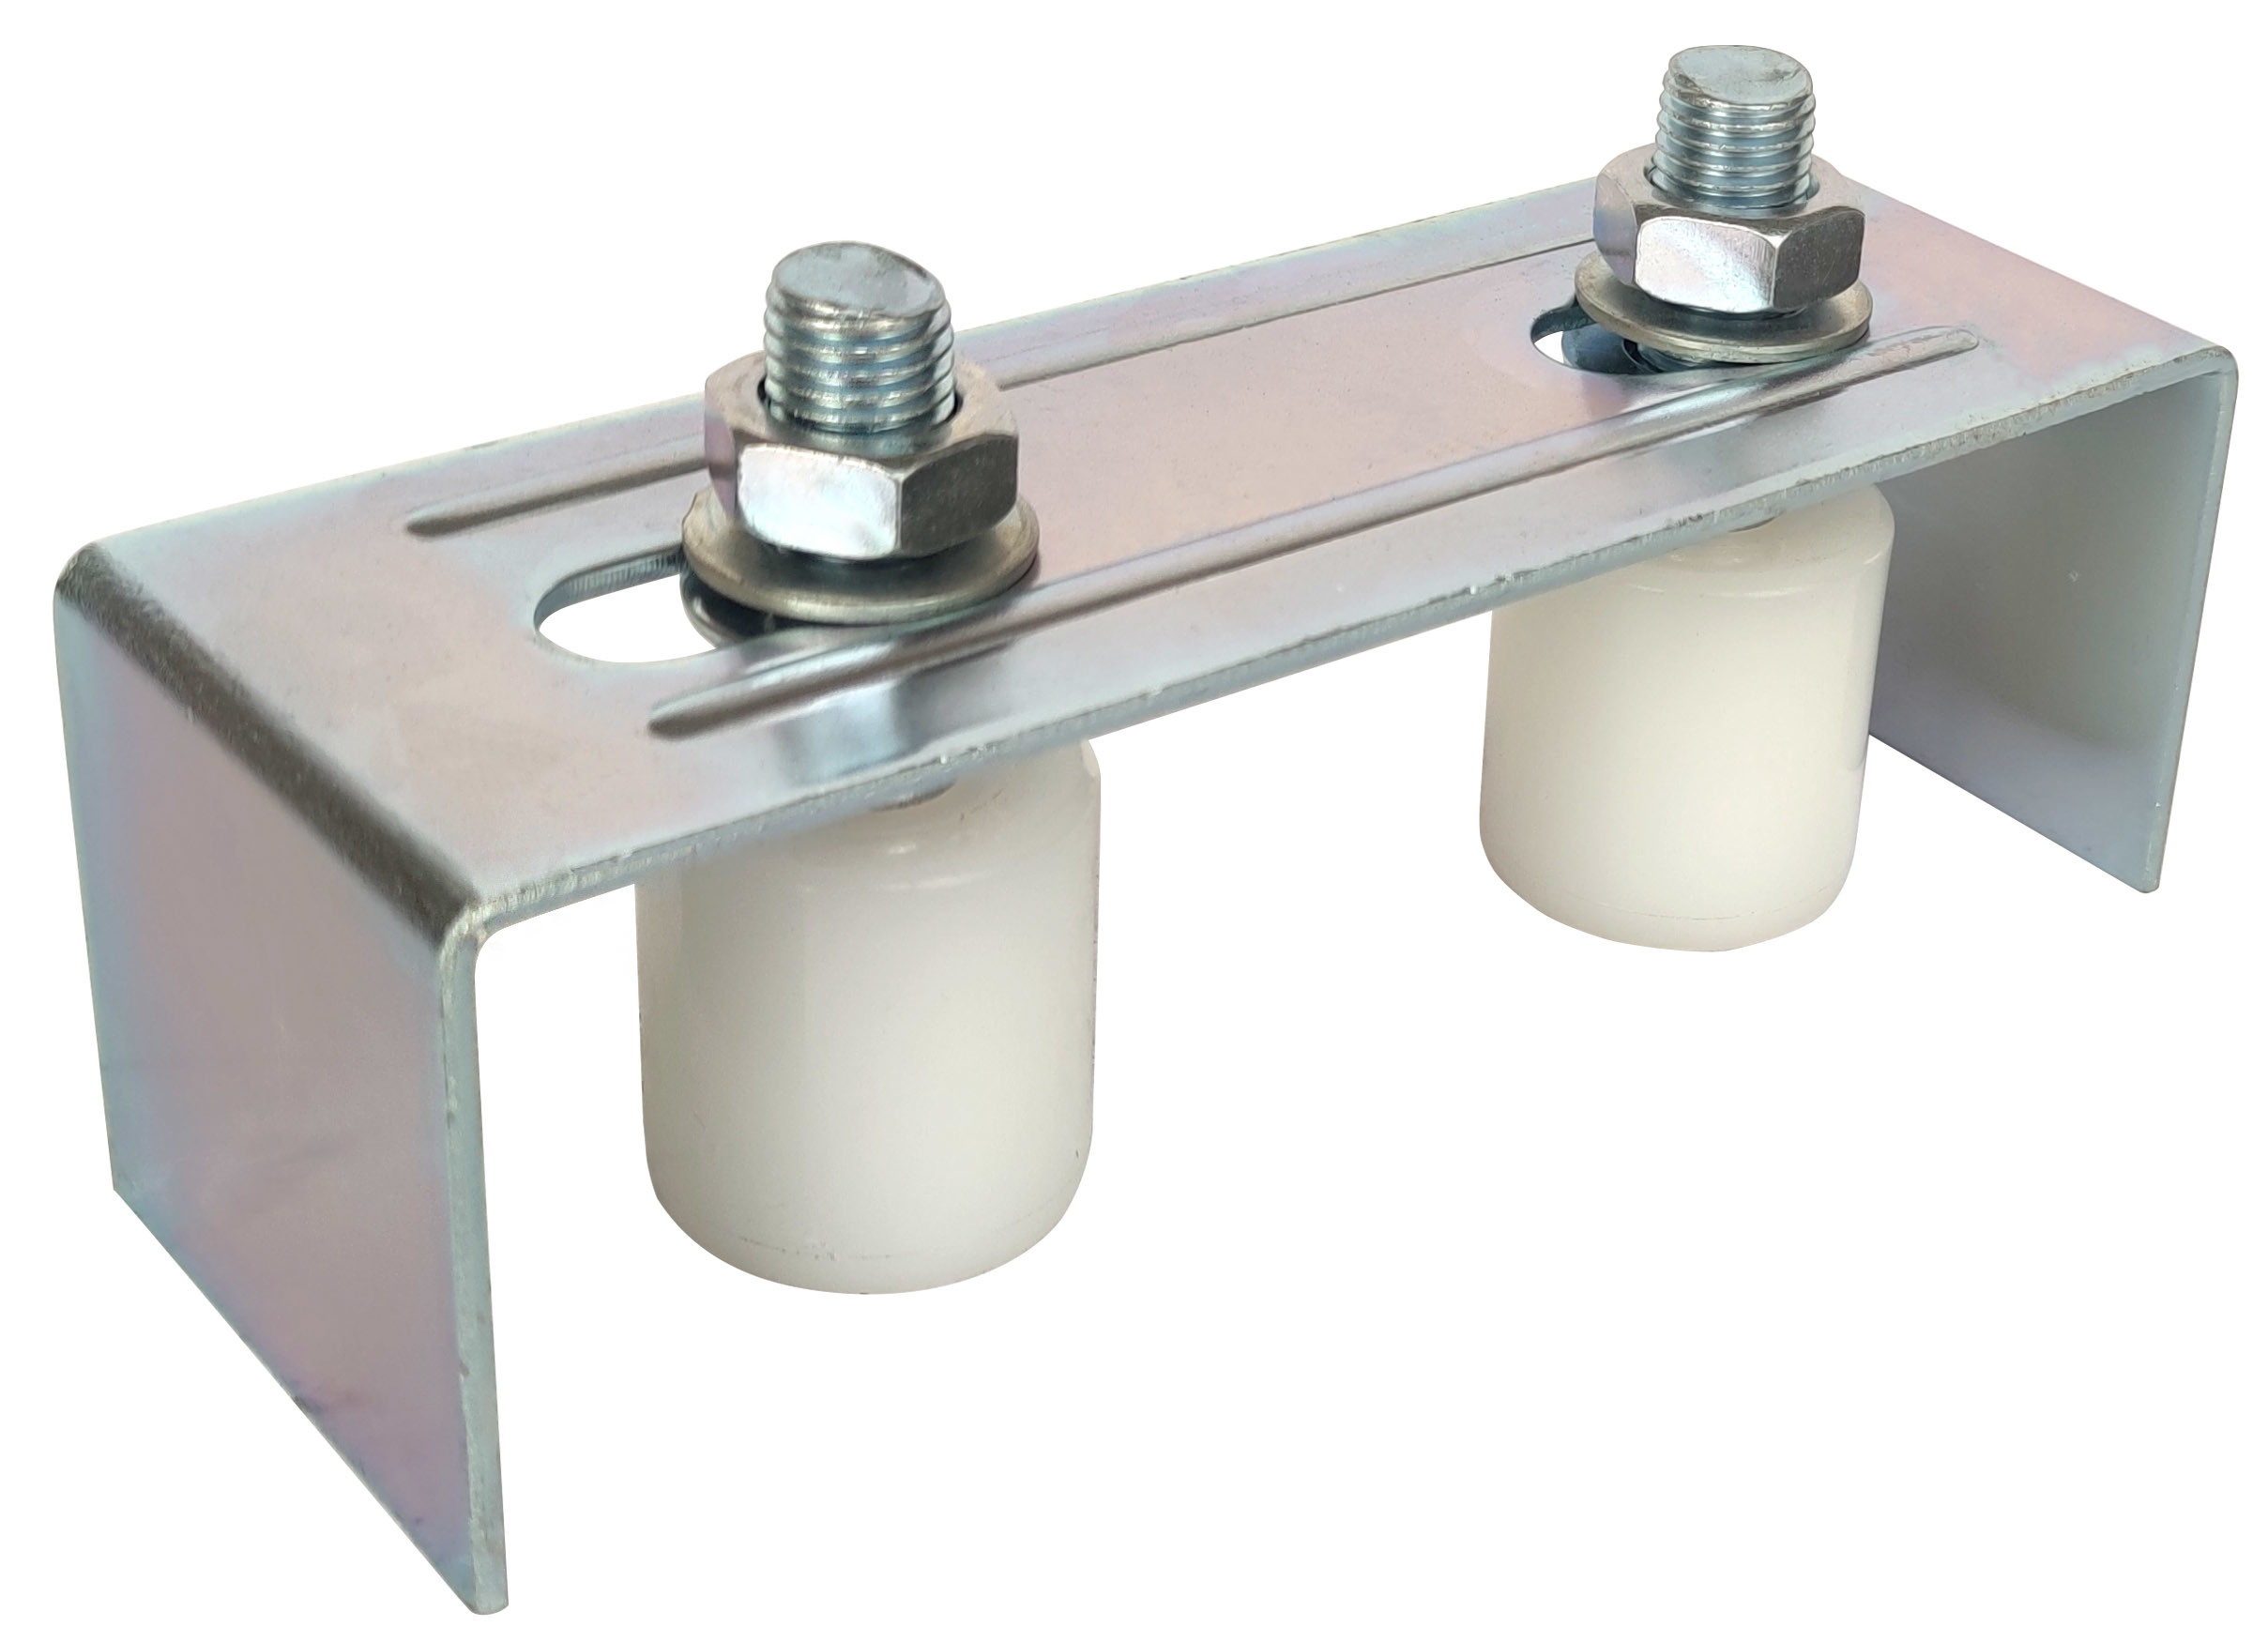  Dual Rollers Sliding Gate Guide Bracket L Rear Post Universal Heavy Duty Adjustable 64mm Manufactures